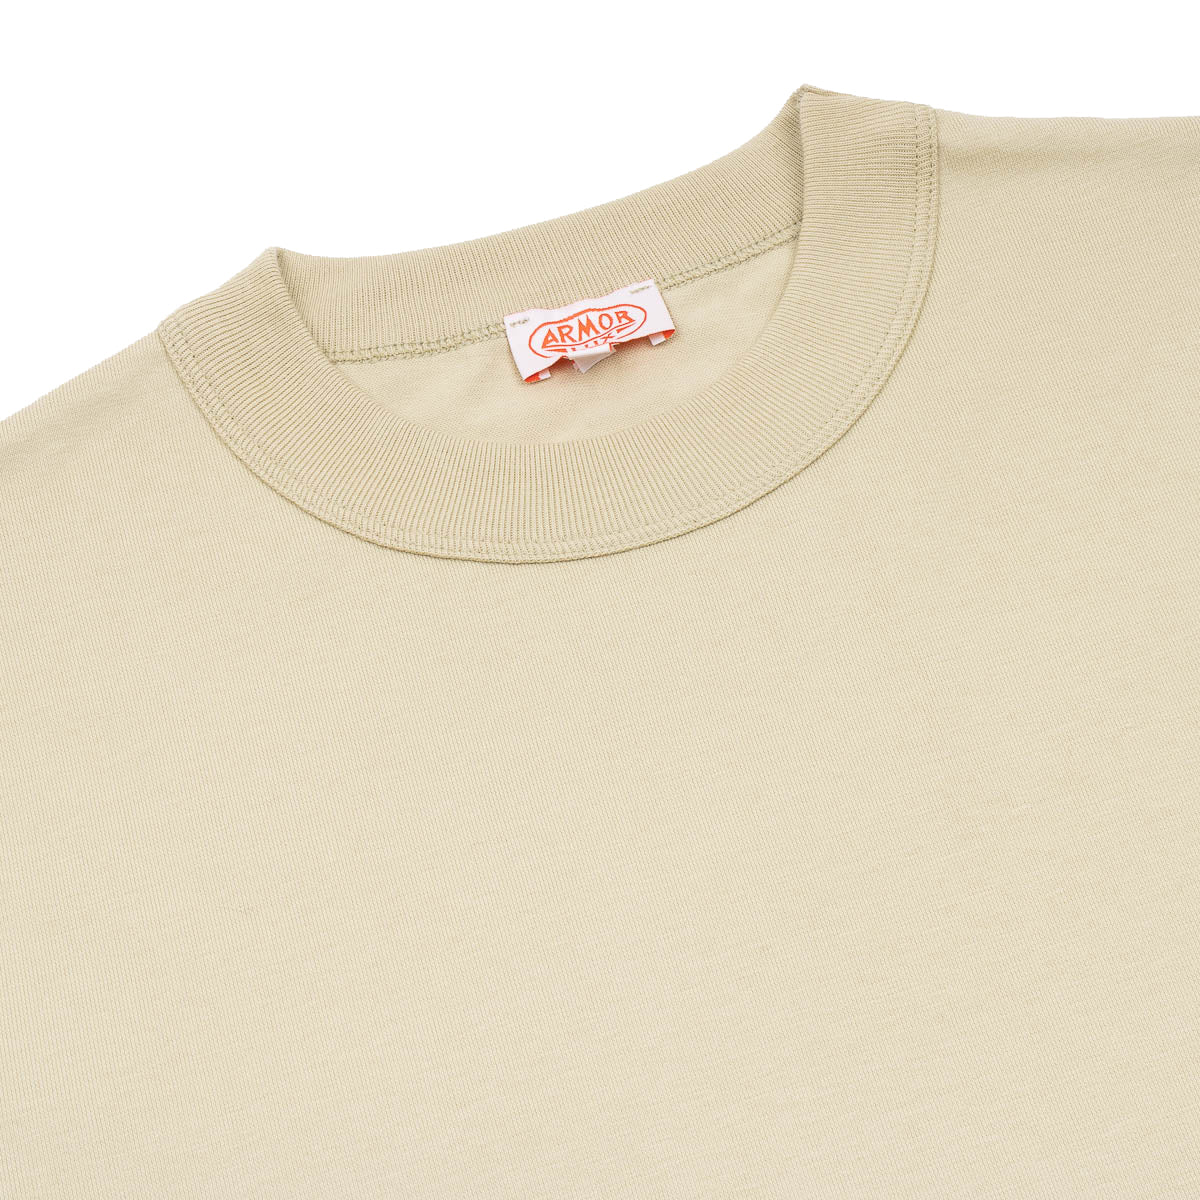 Callac Tee - Pale Olive